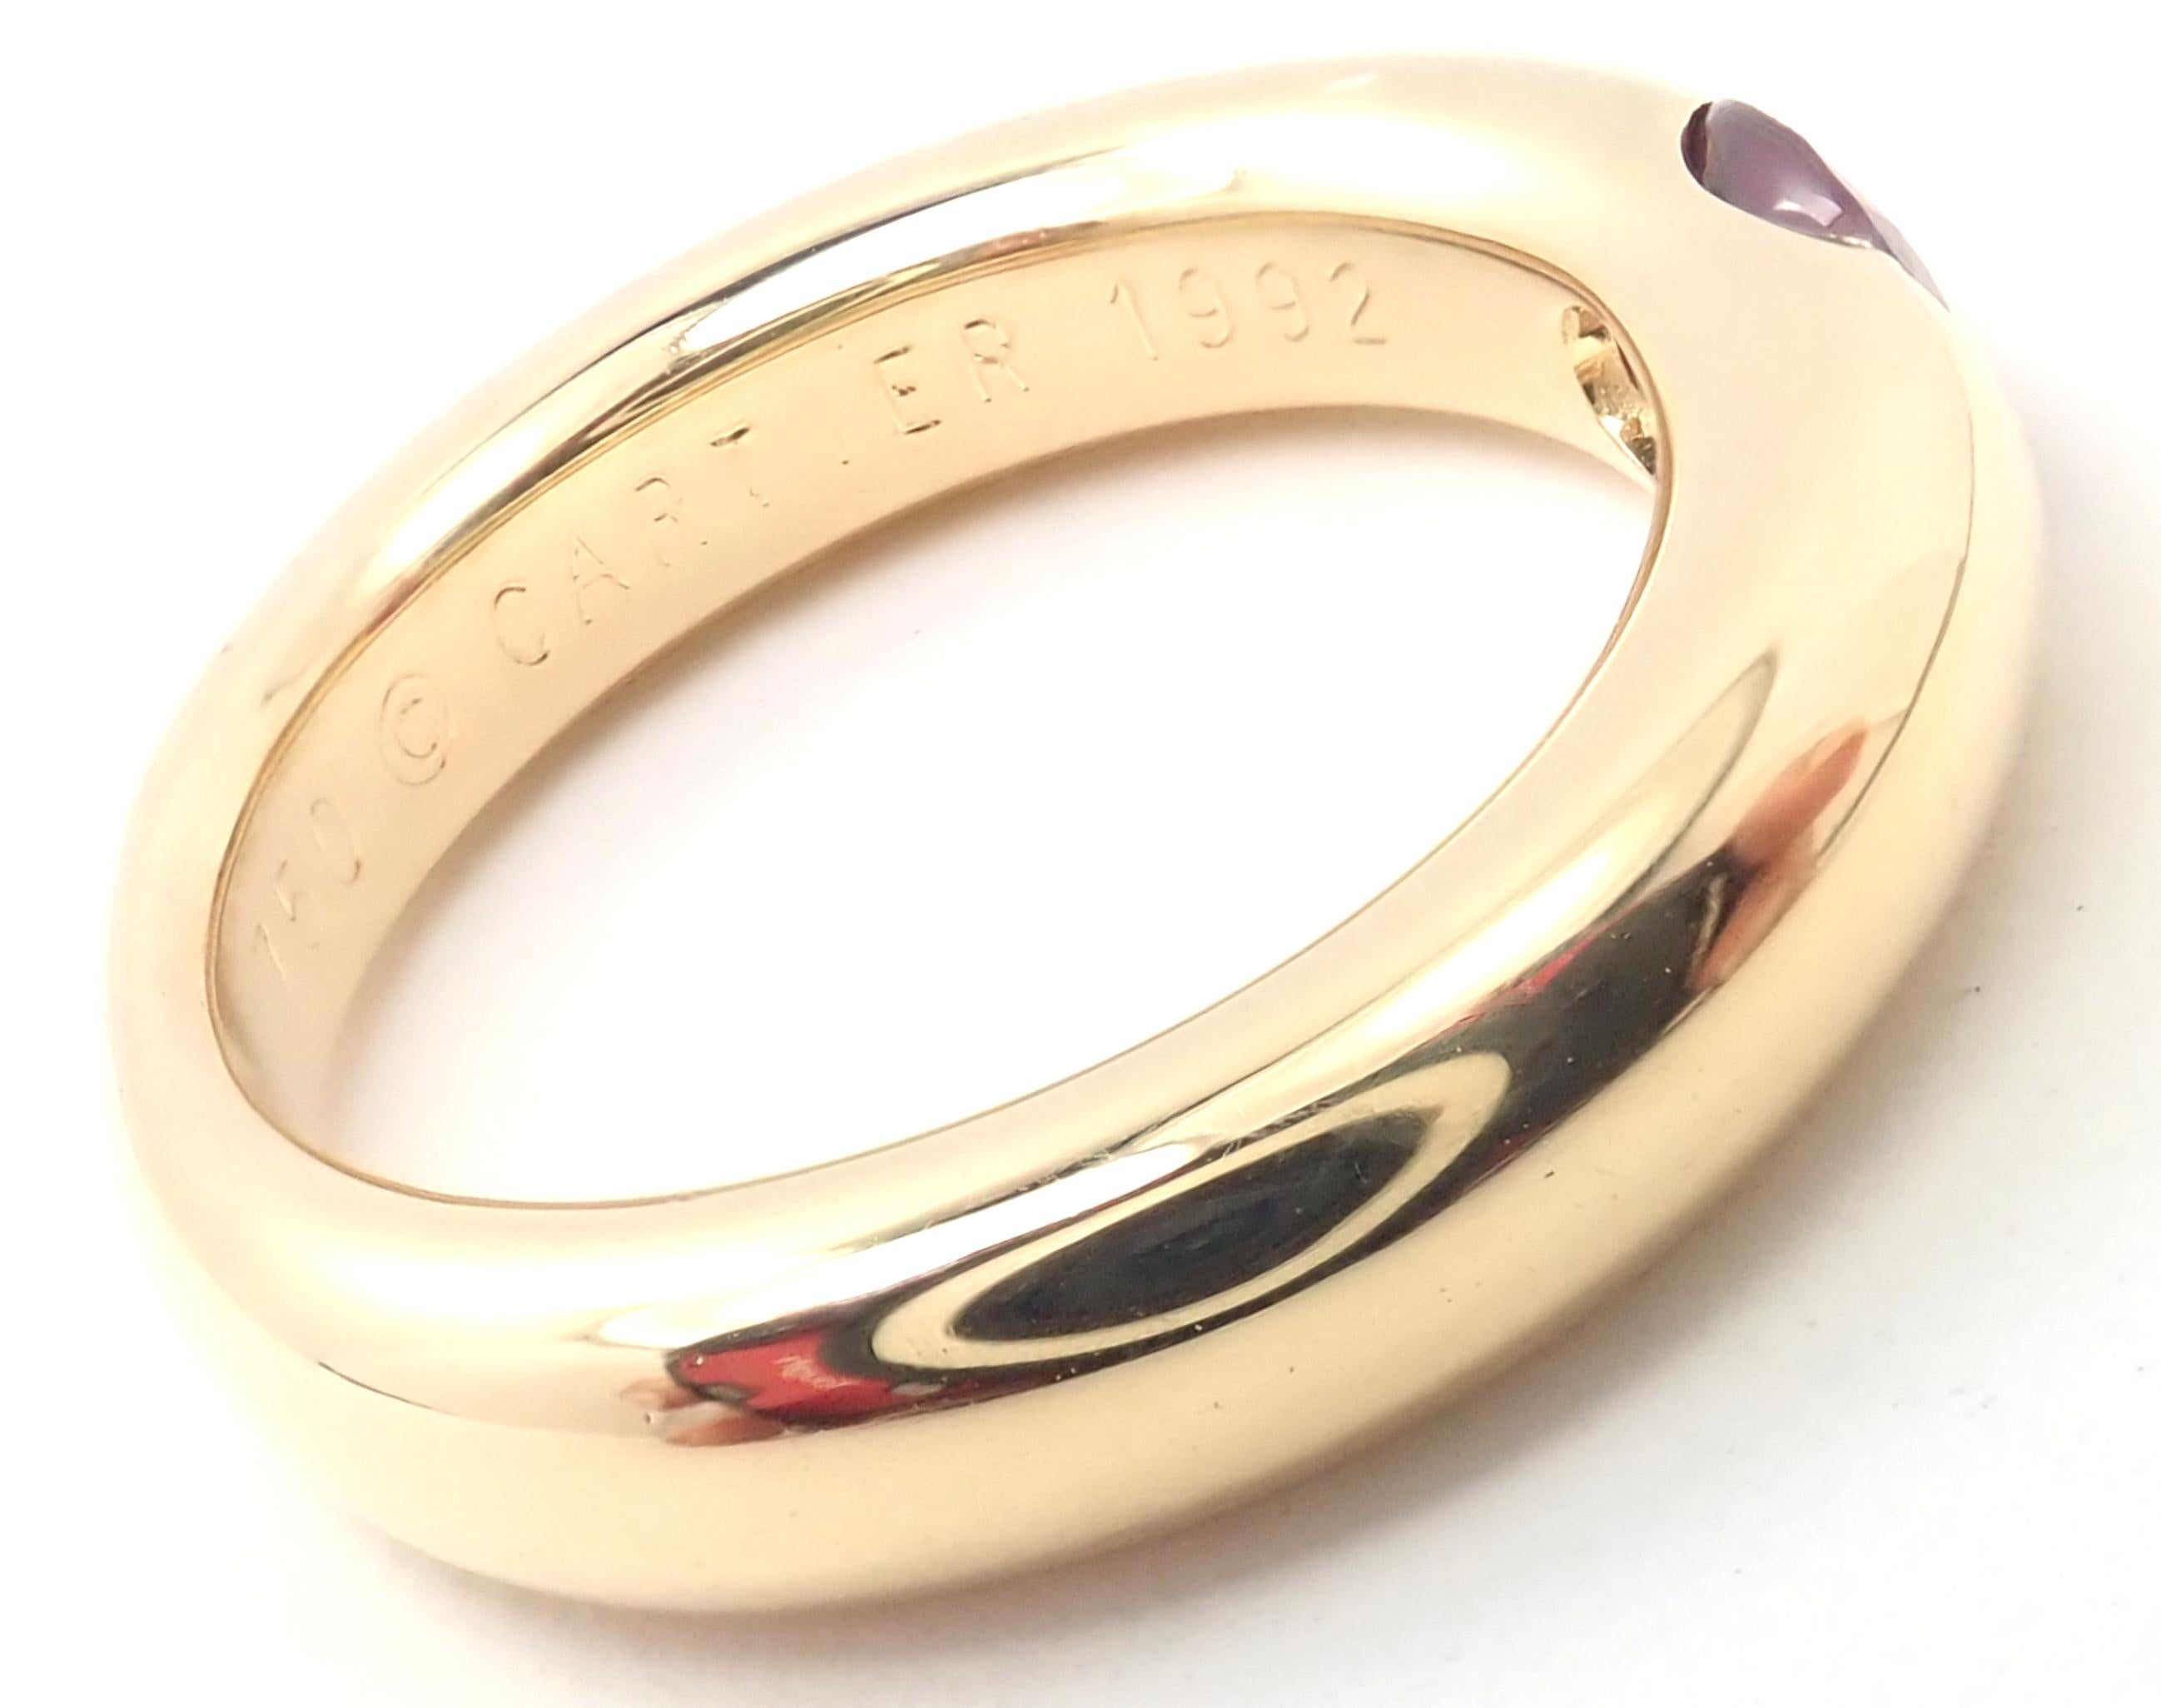 18k Yellow Gold Ellipse Ruby Band Ring by Cartier.
With 1 oval-shaped beautiful ruby 5mm x 4mm.
Details:
Width: 4mm
Weight: 9.1 grams
Ring Size: EEuropean 50, US 5 1/4
Stamped Hallmarks: Cartier 750 51 1992 DXXXX (serial number omitted)
*Free